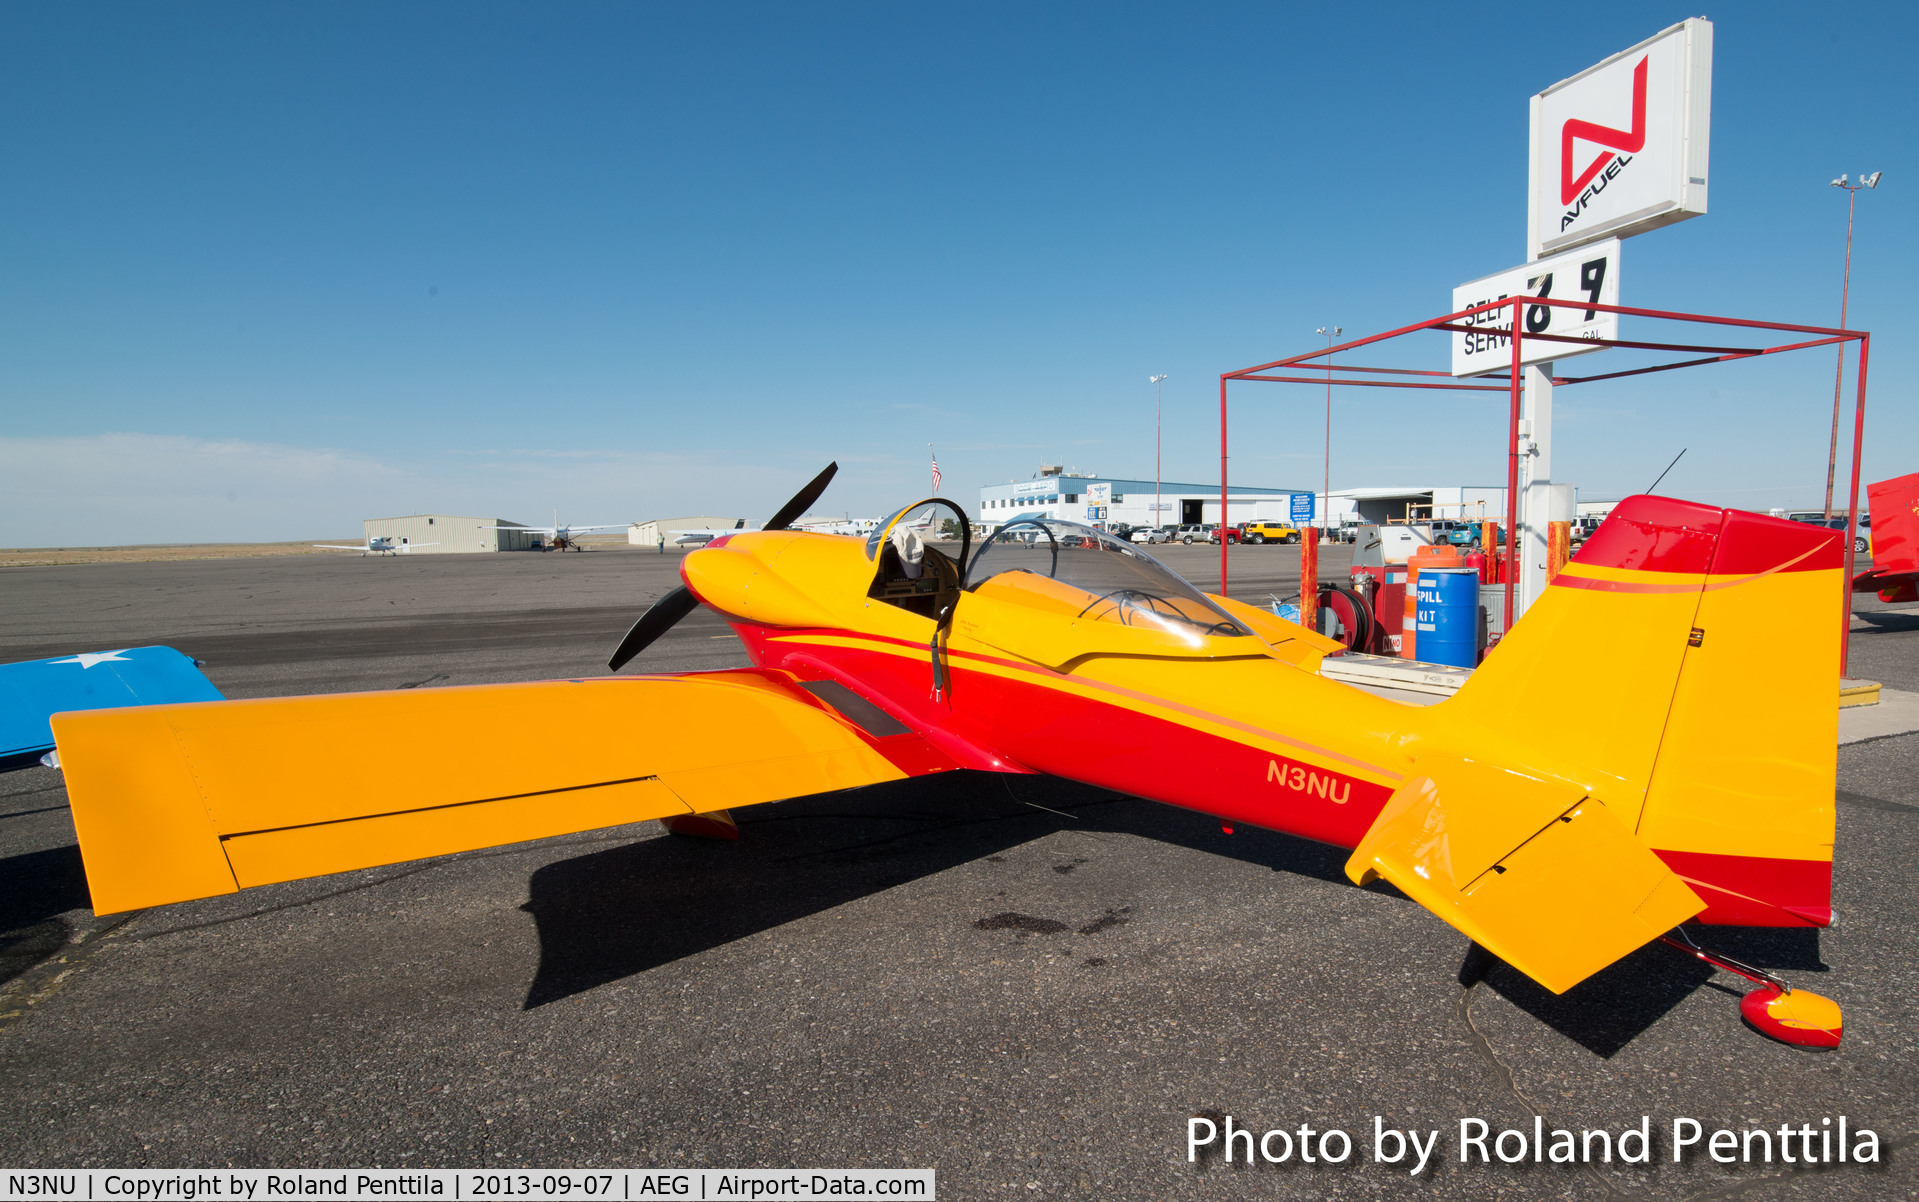 N3NU, Vans RV-3B C/N 11429, Owned by John Nystrom of Placitas, New Mexico.  This plane is part of the aerial demonstration team called 